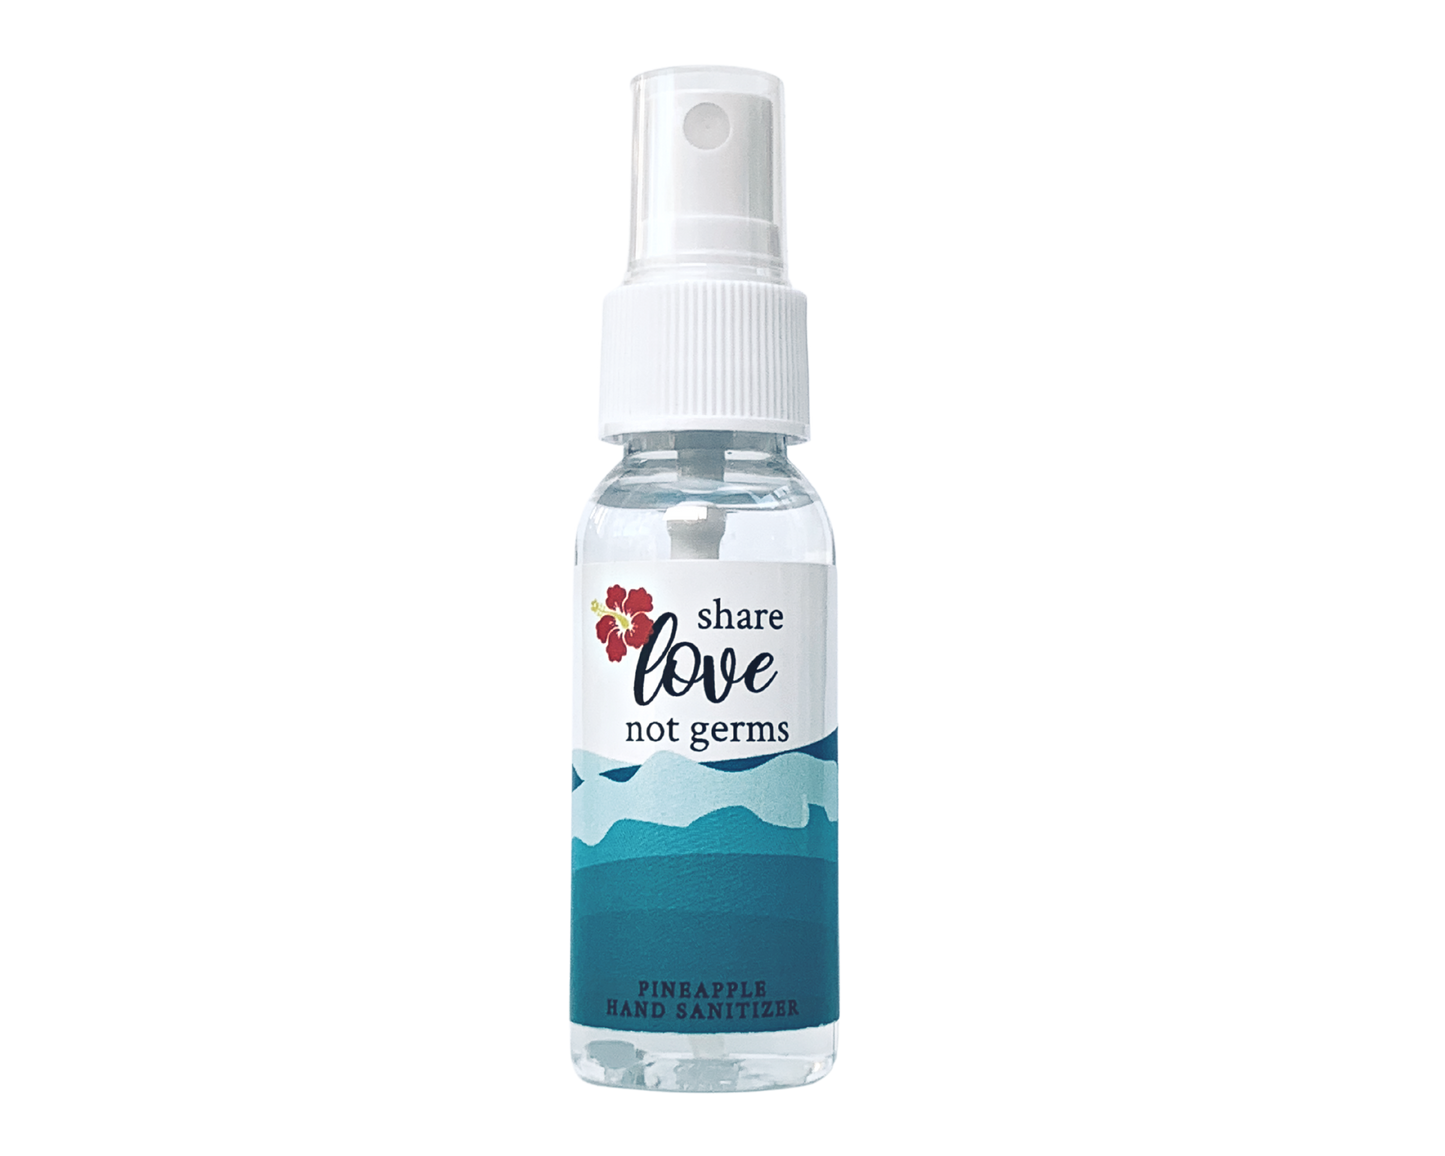 Hand Sanitizer Party Favor - Ocean Hibiscus - Share Love Not Germs - with Aloe & Essential Oils by Sunshine & Sanitizer